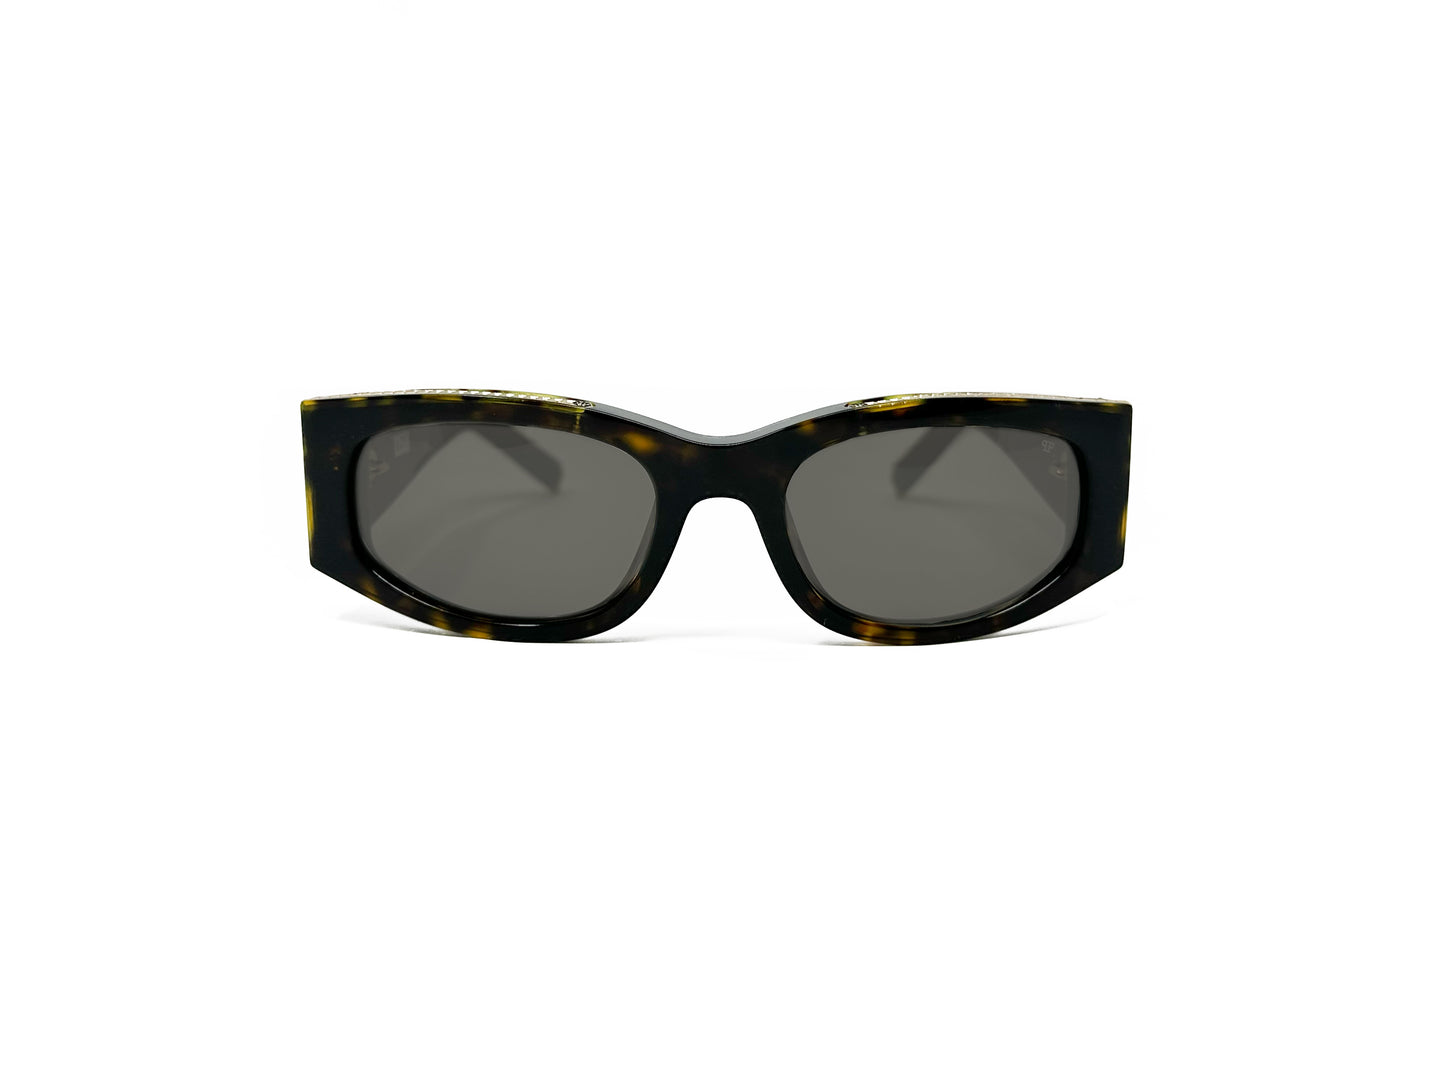 Philipp Plein curved, rectangular, acetate sunglass with an upswept lift and straight sides. Model: Nobile Rome. Color: 0722 Tortoise. Front view.